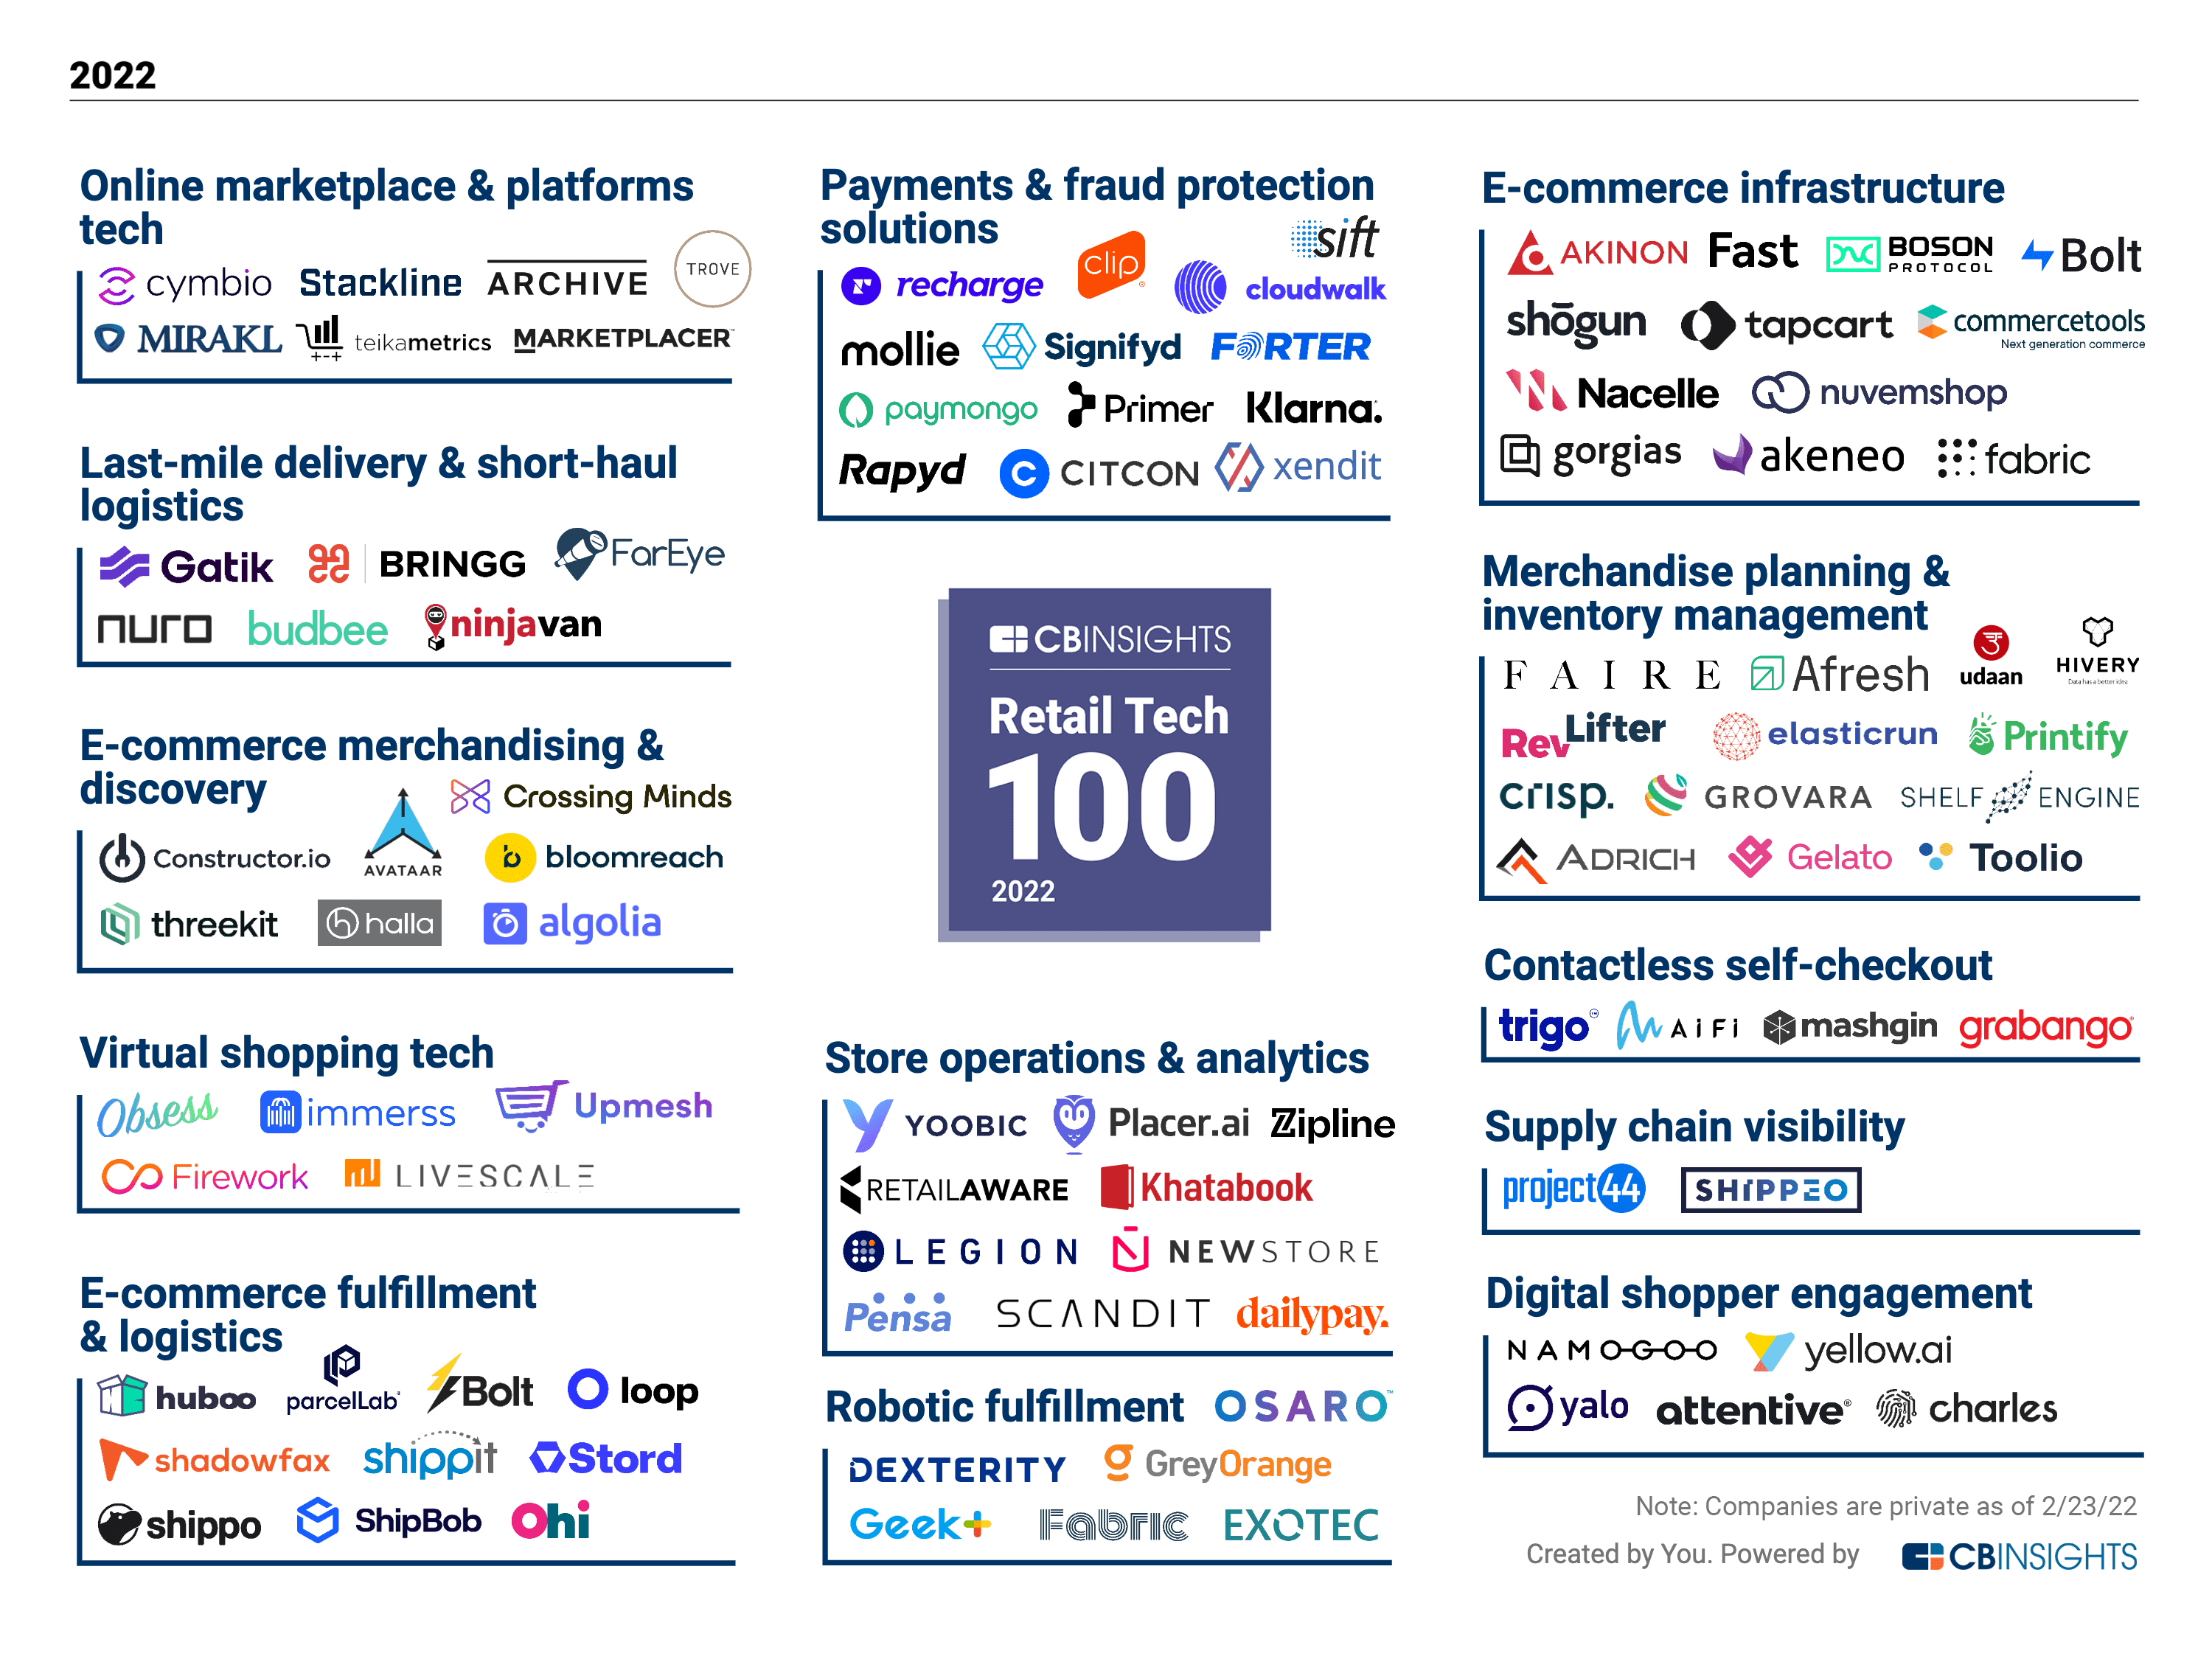 The Retail Tech 100: The tech companies of 2022 - CB Insights Research